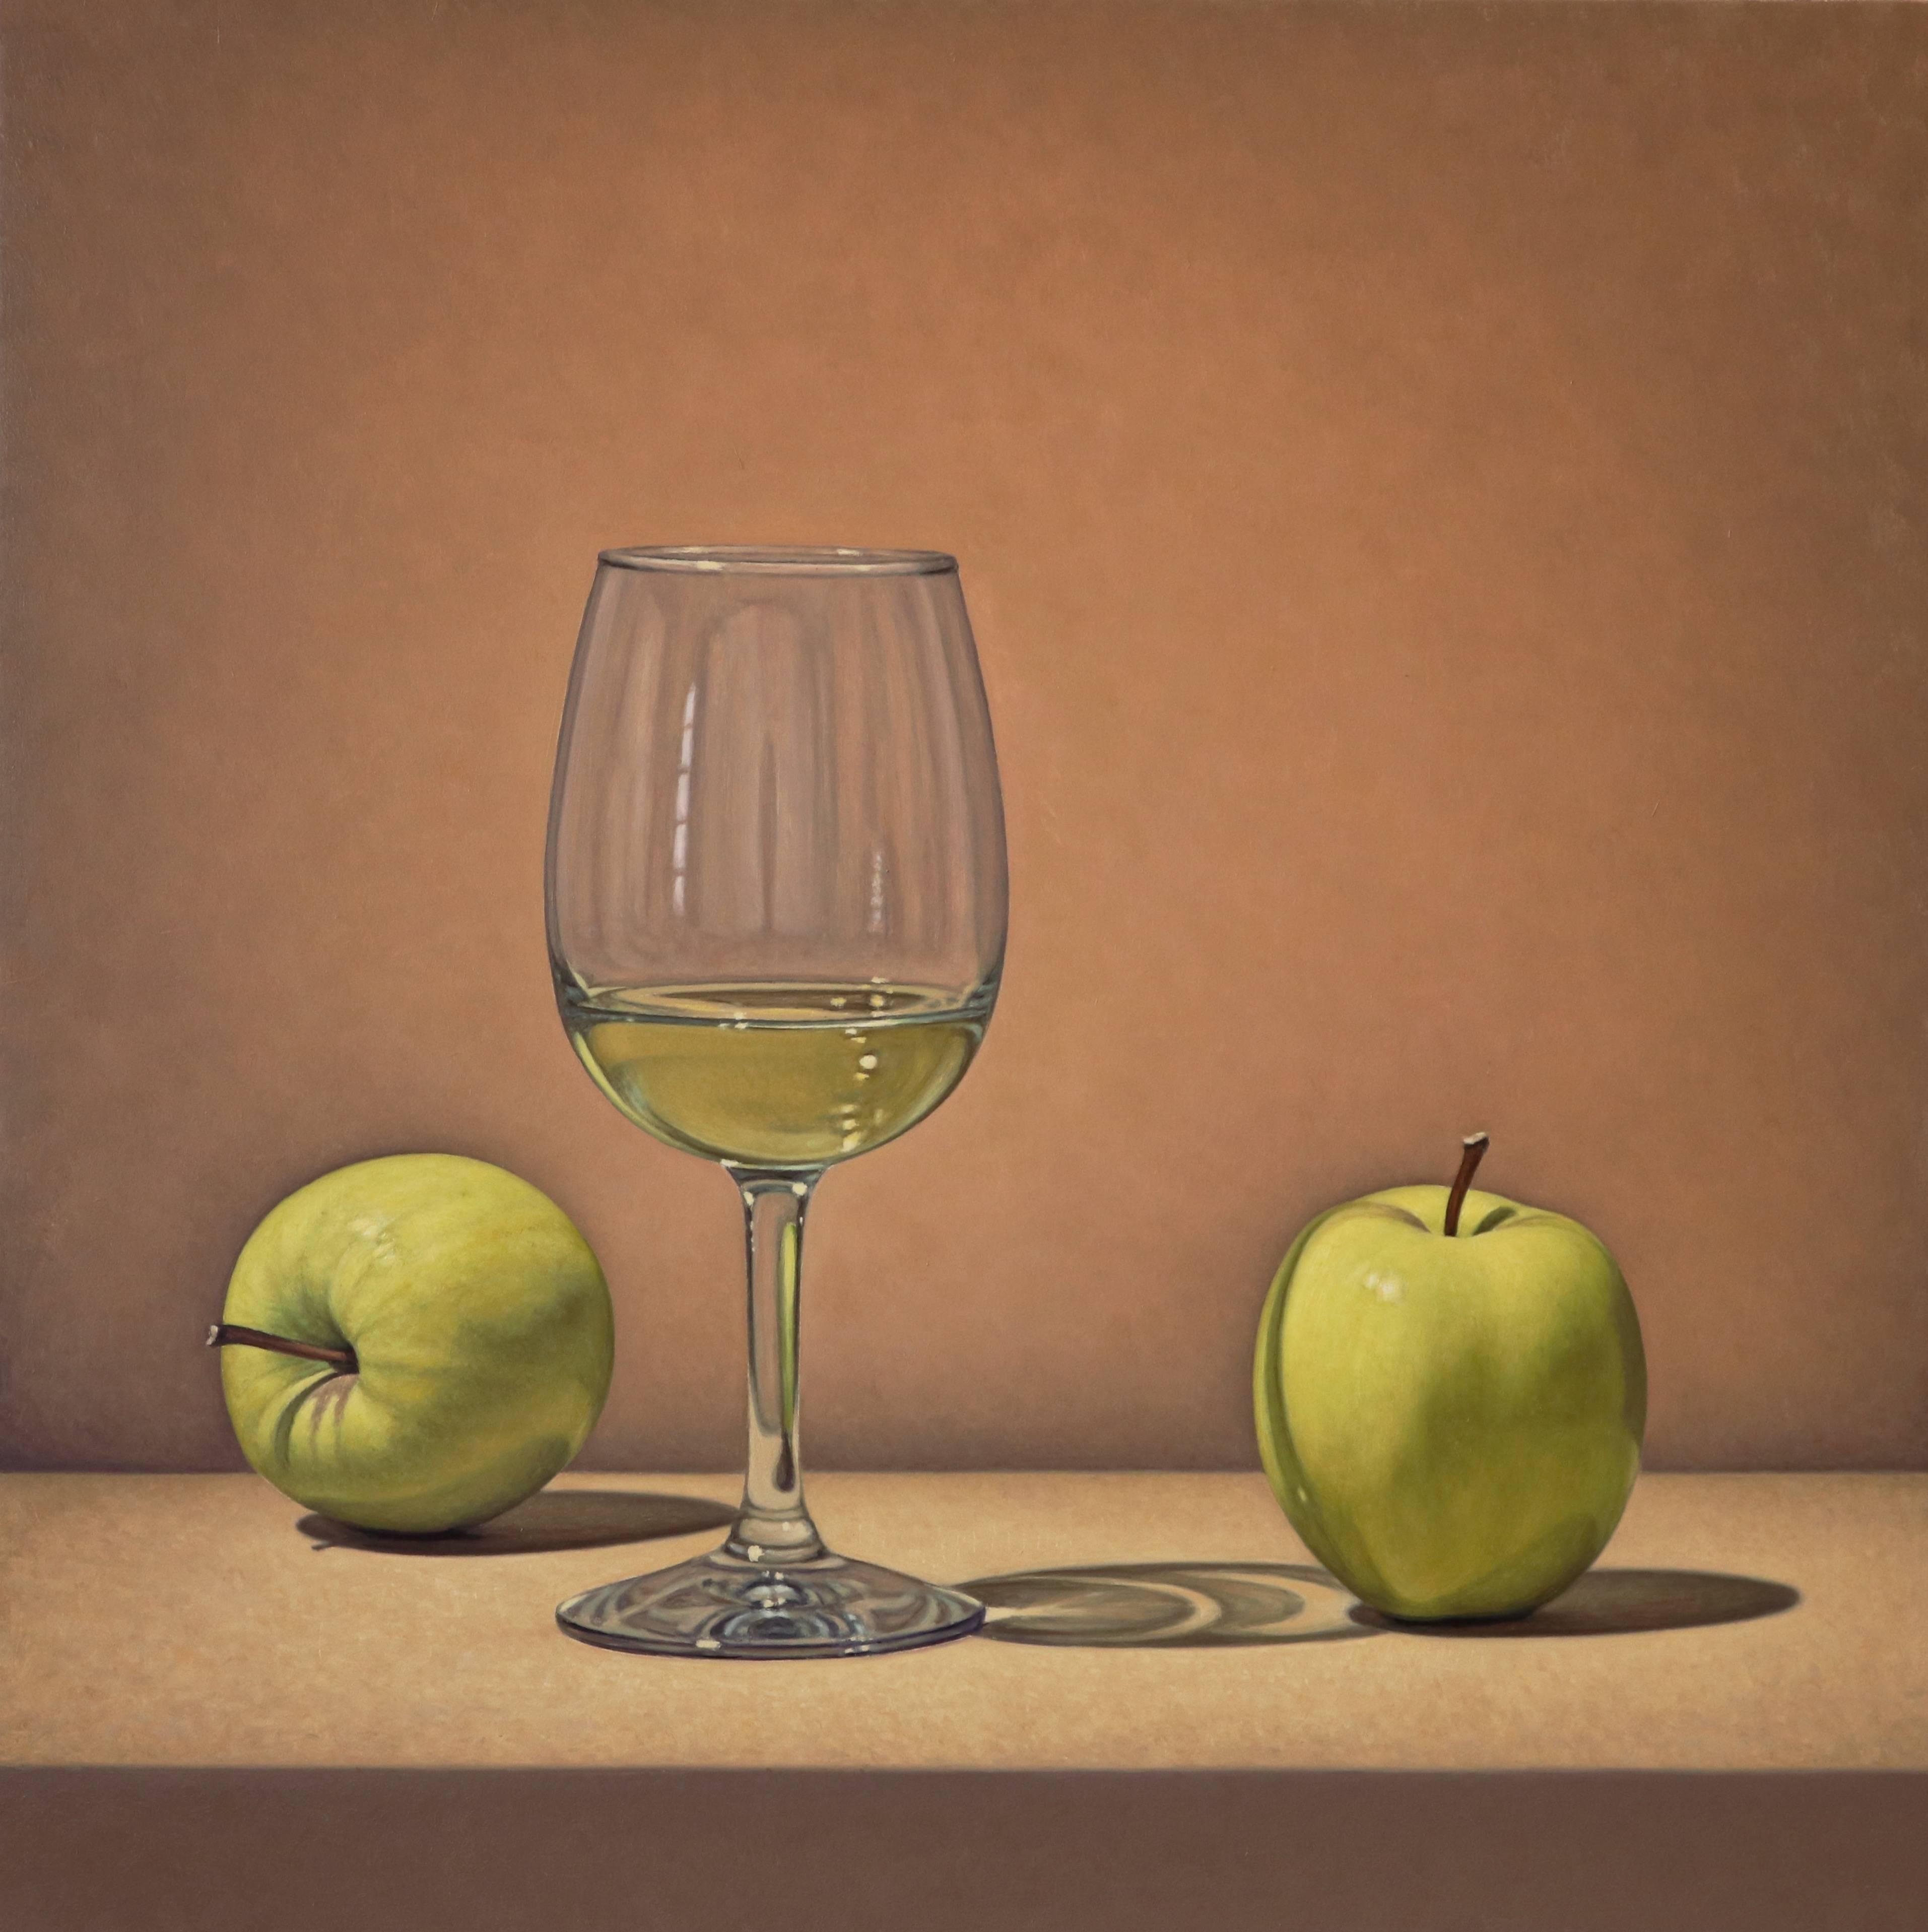 Two Apples and Wine